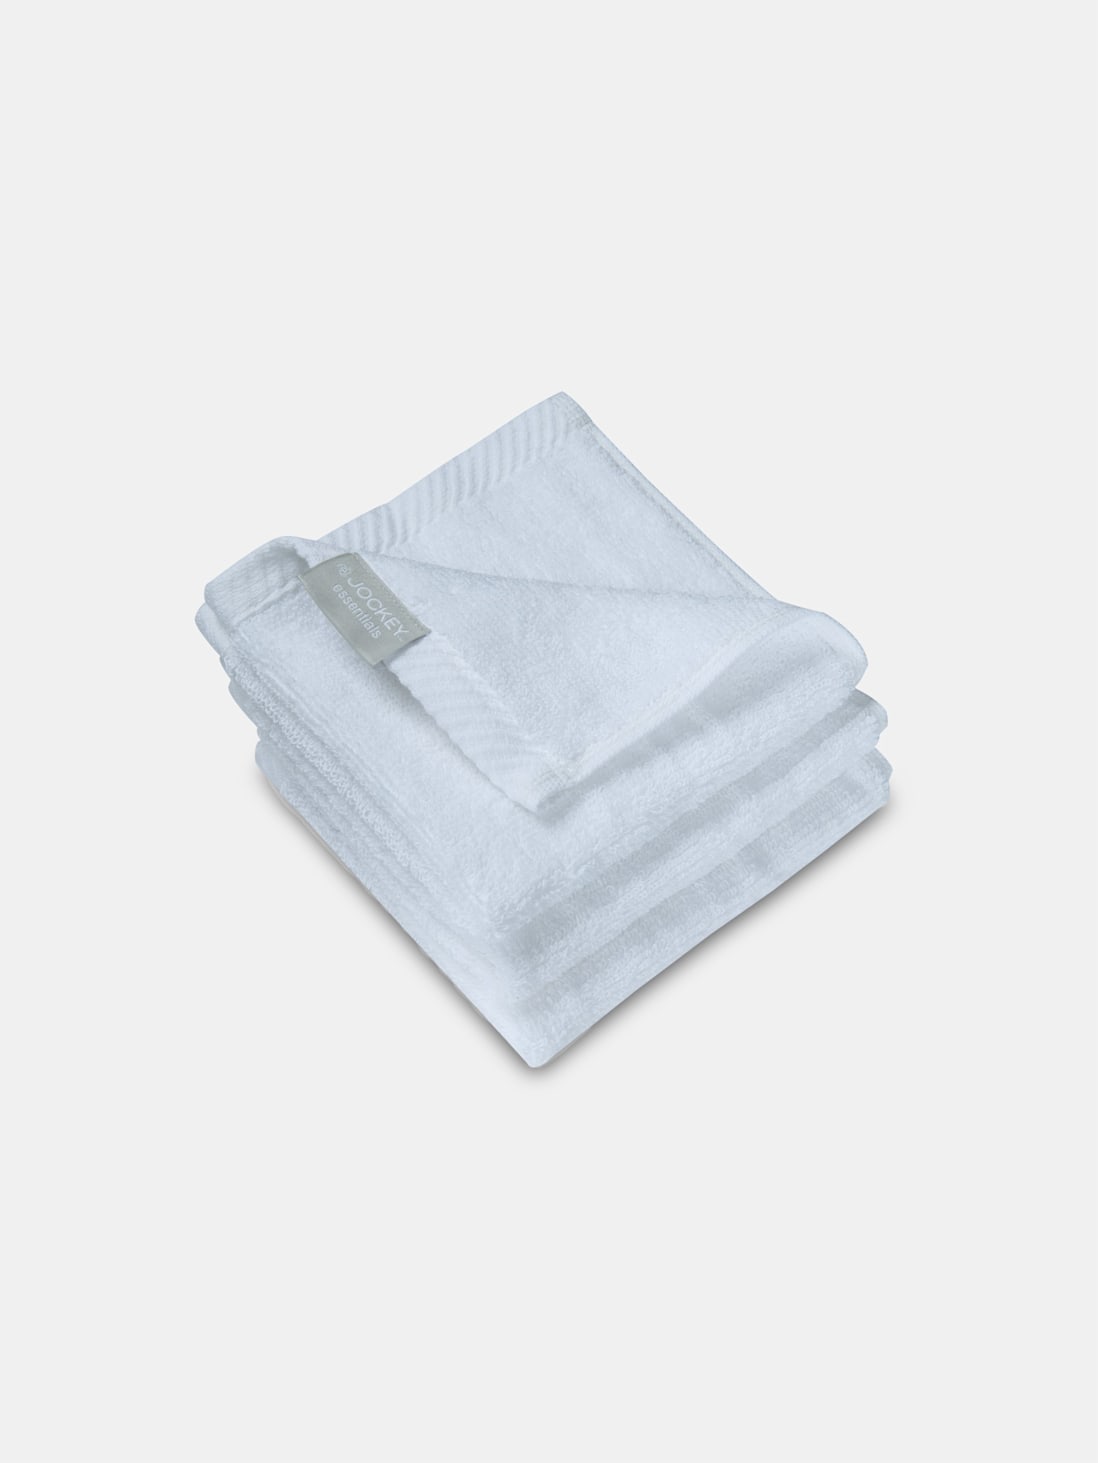 Buy Cotton Terry Ultrasoft and Durable Solid Face Towel - White